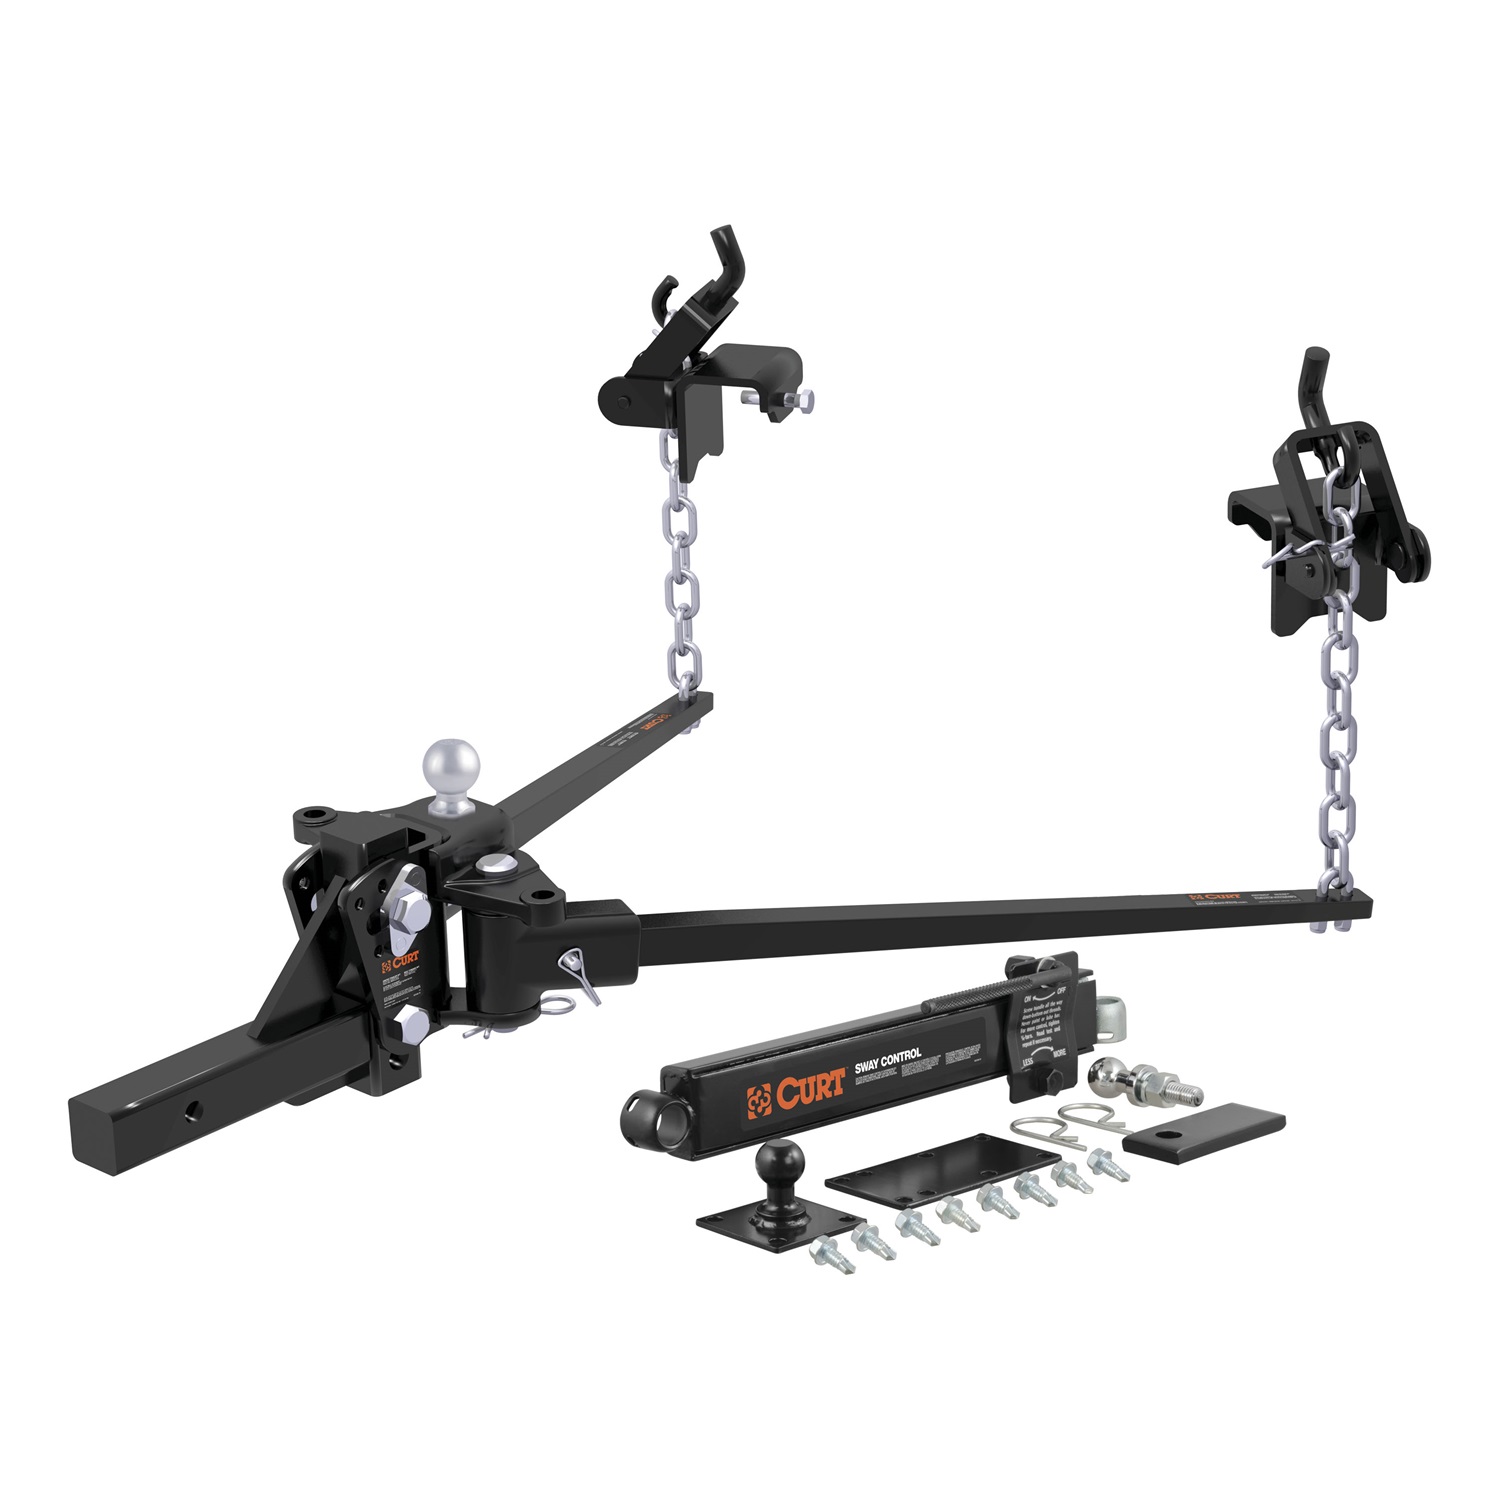 CURT Manufacturing CURT Manufacturing 17323 Weight Distributing Hitch; Trunion Bar  Fits